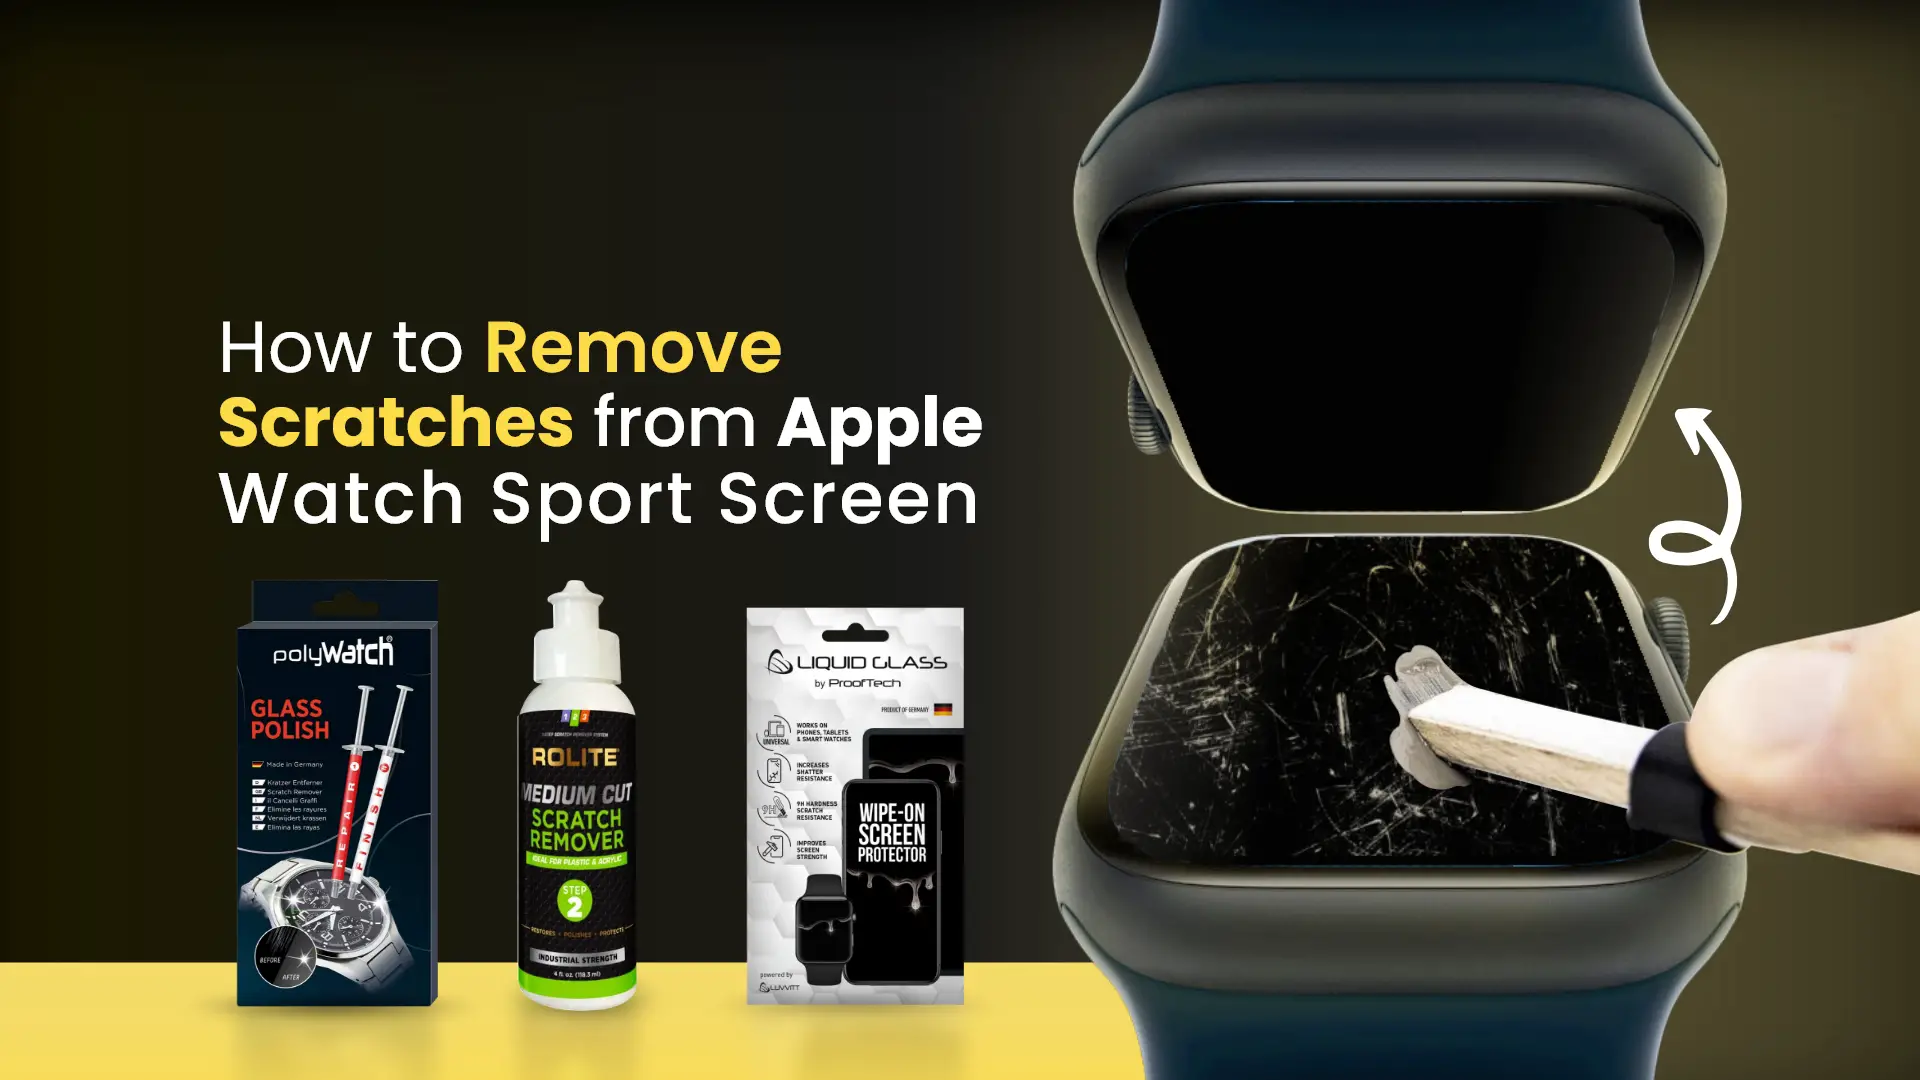 How to Remove Scratches from Apple Watch Sport Screen